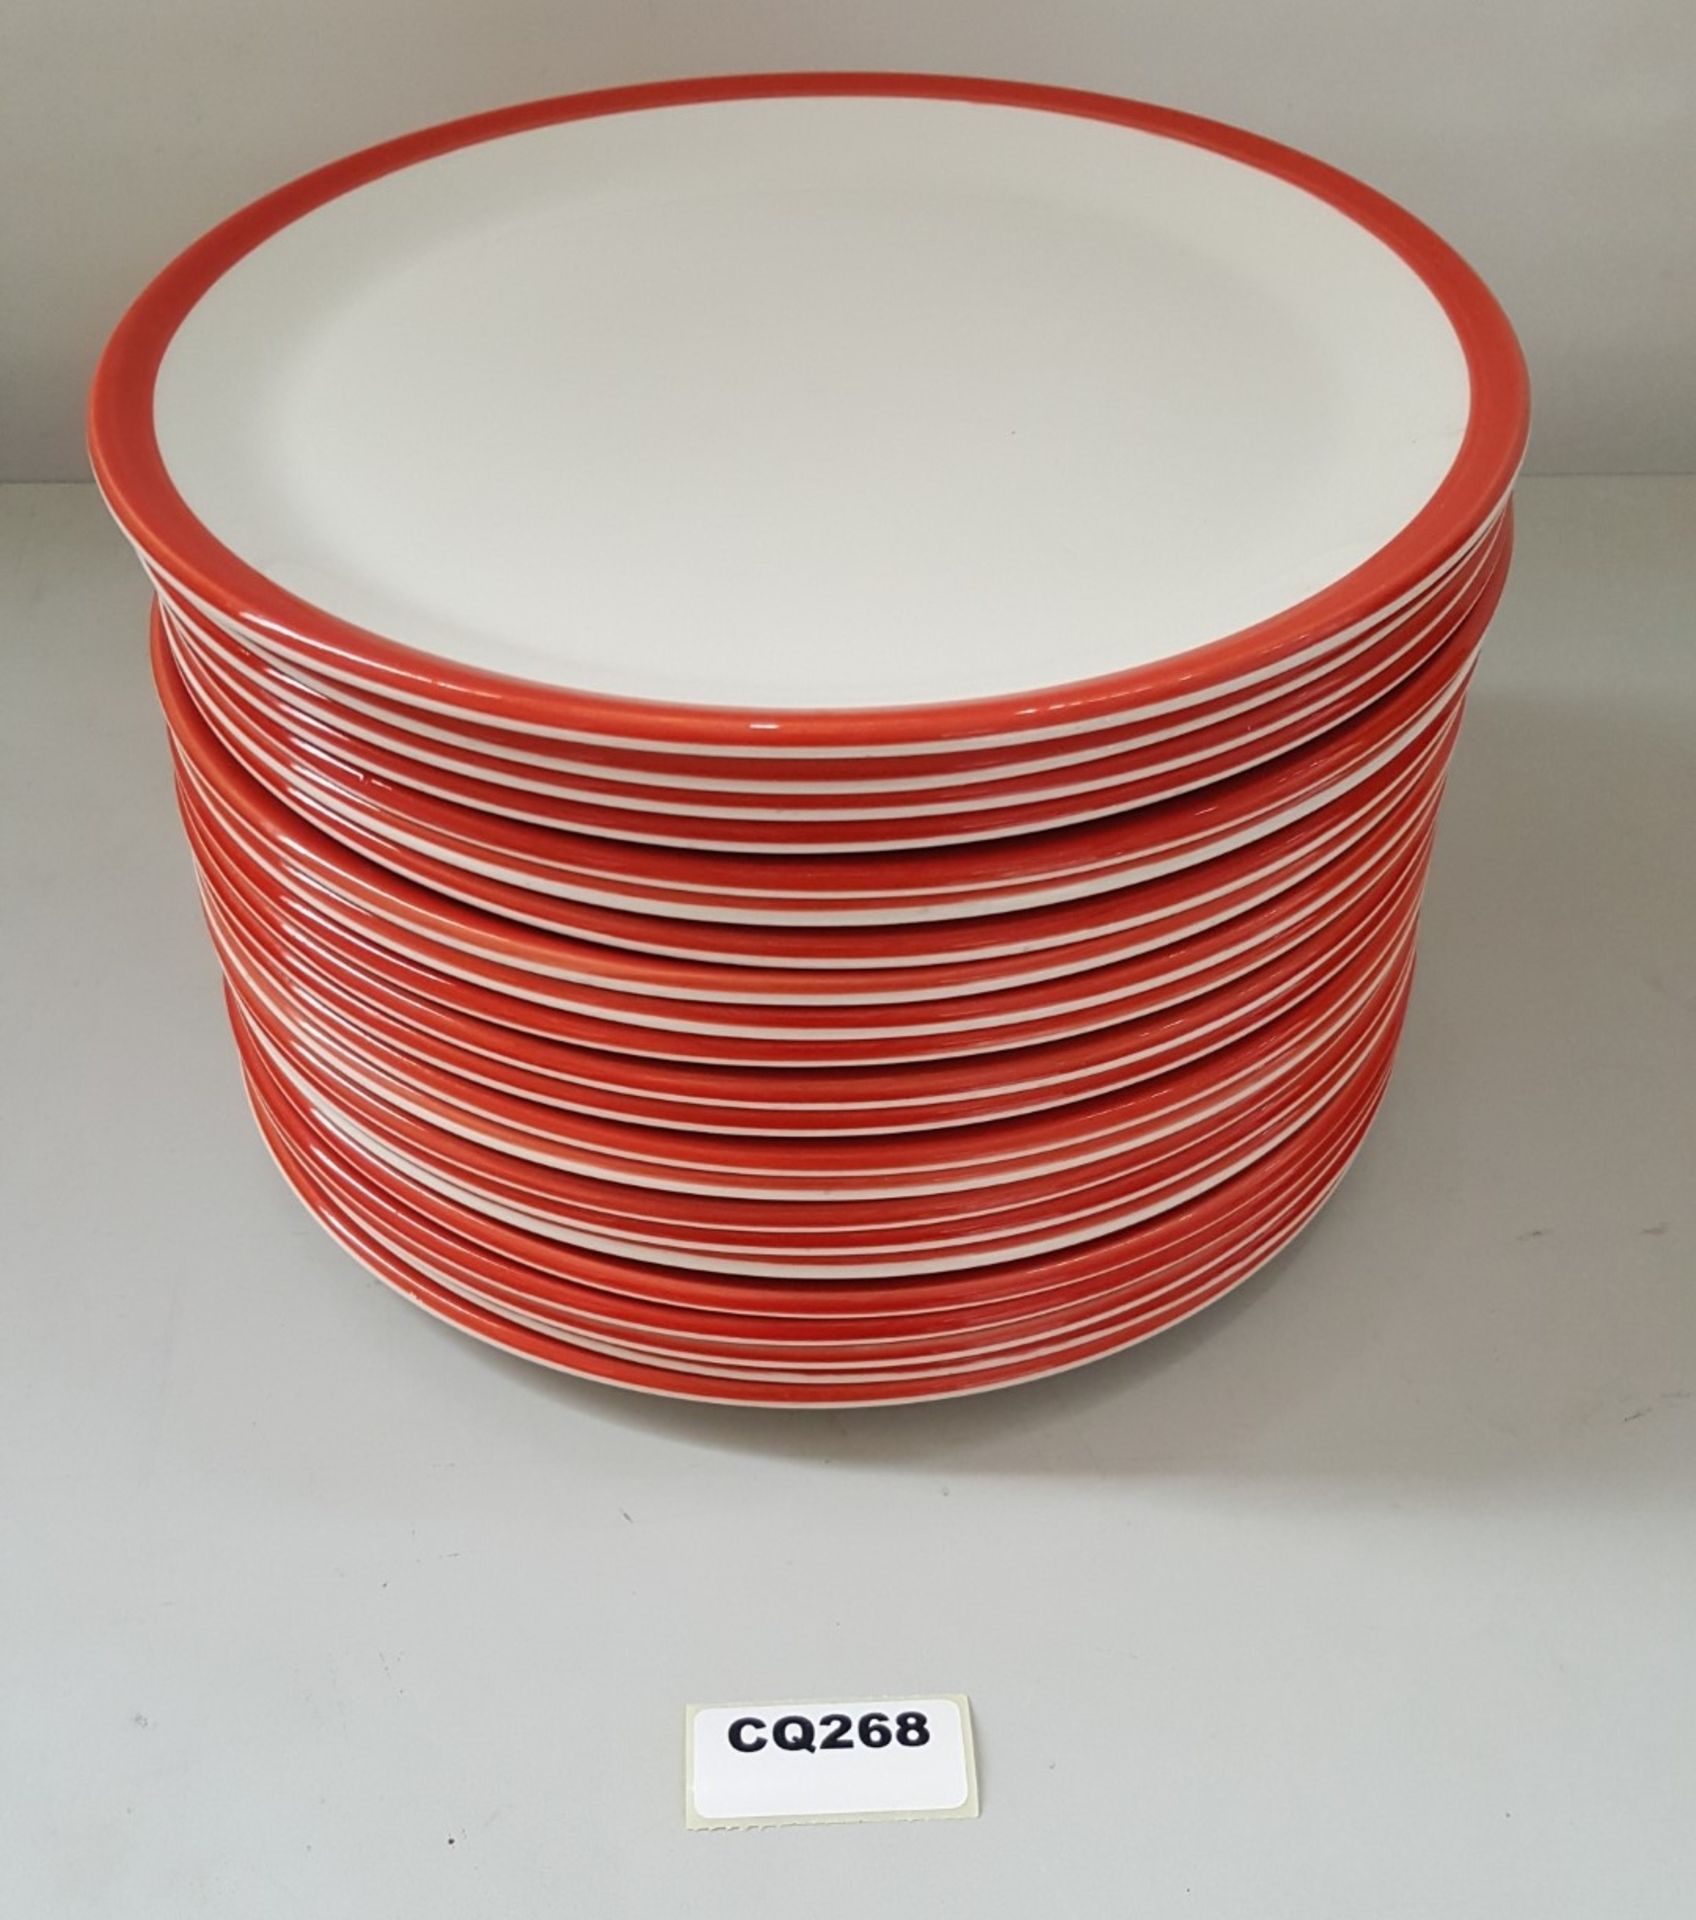 22 x Steelite Coupe Plates White With Red Outline Egde 27.5CM - Ref CQ268